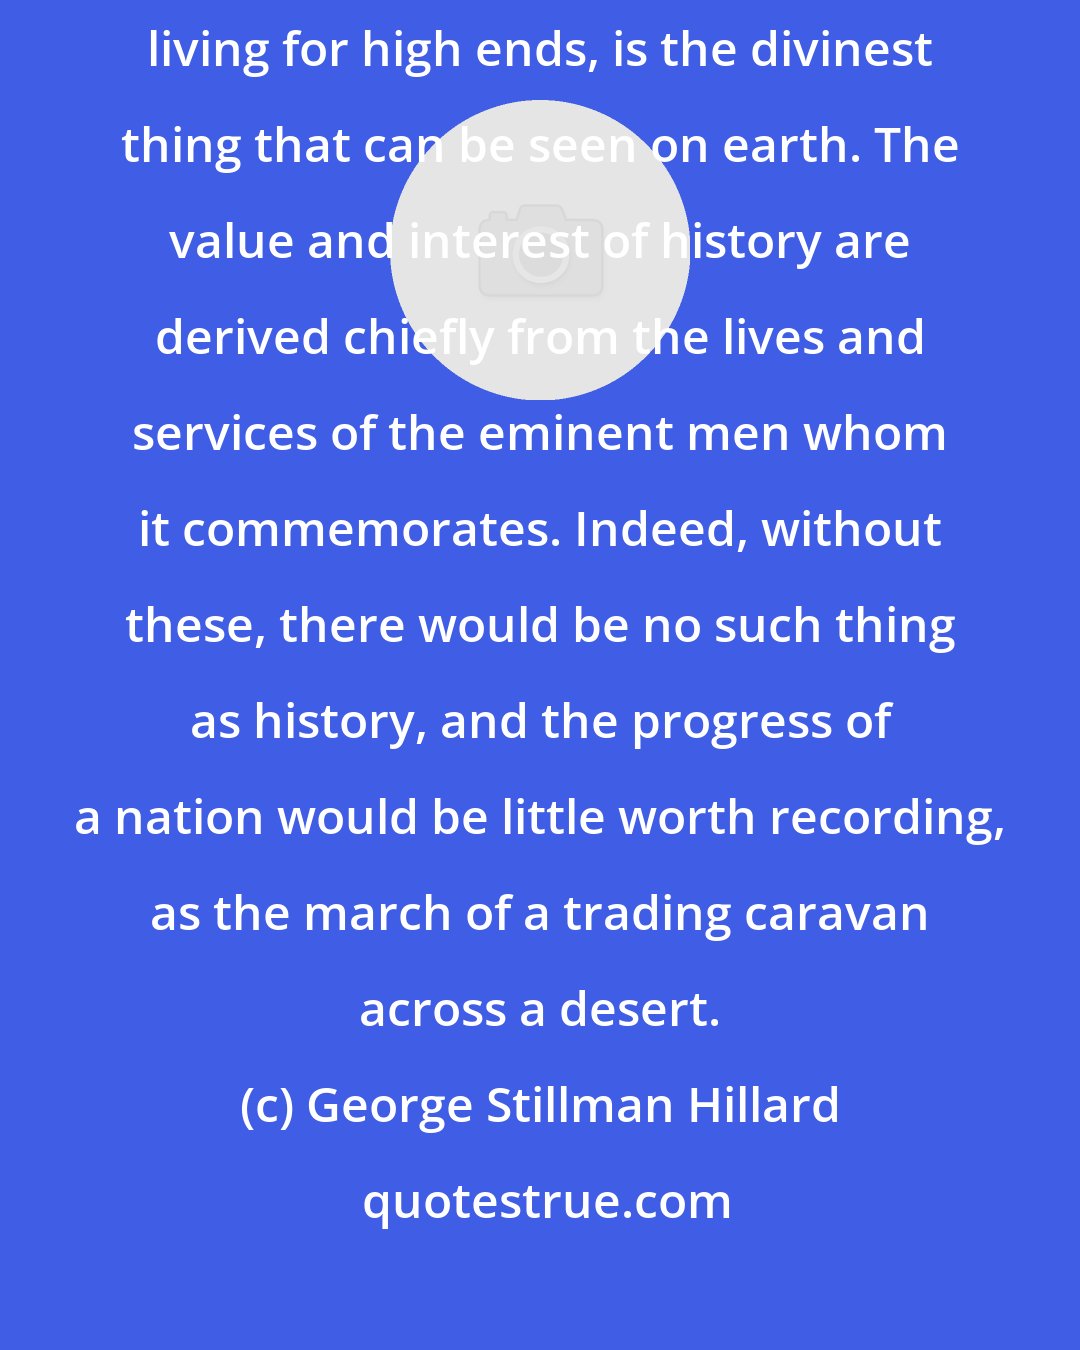 George Stillman Hillard: A great man is a gift, in some measure a revelation of God. A great man, living for high ends, is the divinest thing that can be seen on earth. The value and interest of history are derived chiefly from the lives and services of the eminent men whom it commemorates. Indeed, without these, there would be no such thing as history, and the progress of a nation would be little worth recording, as the march of a trading caravan across a desert.